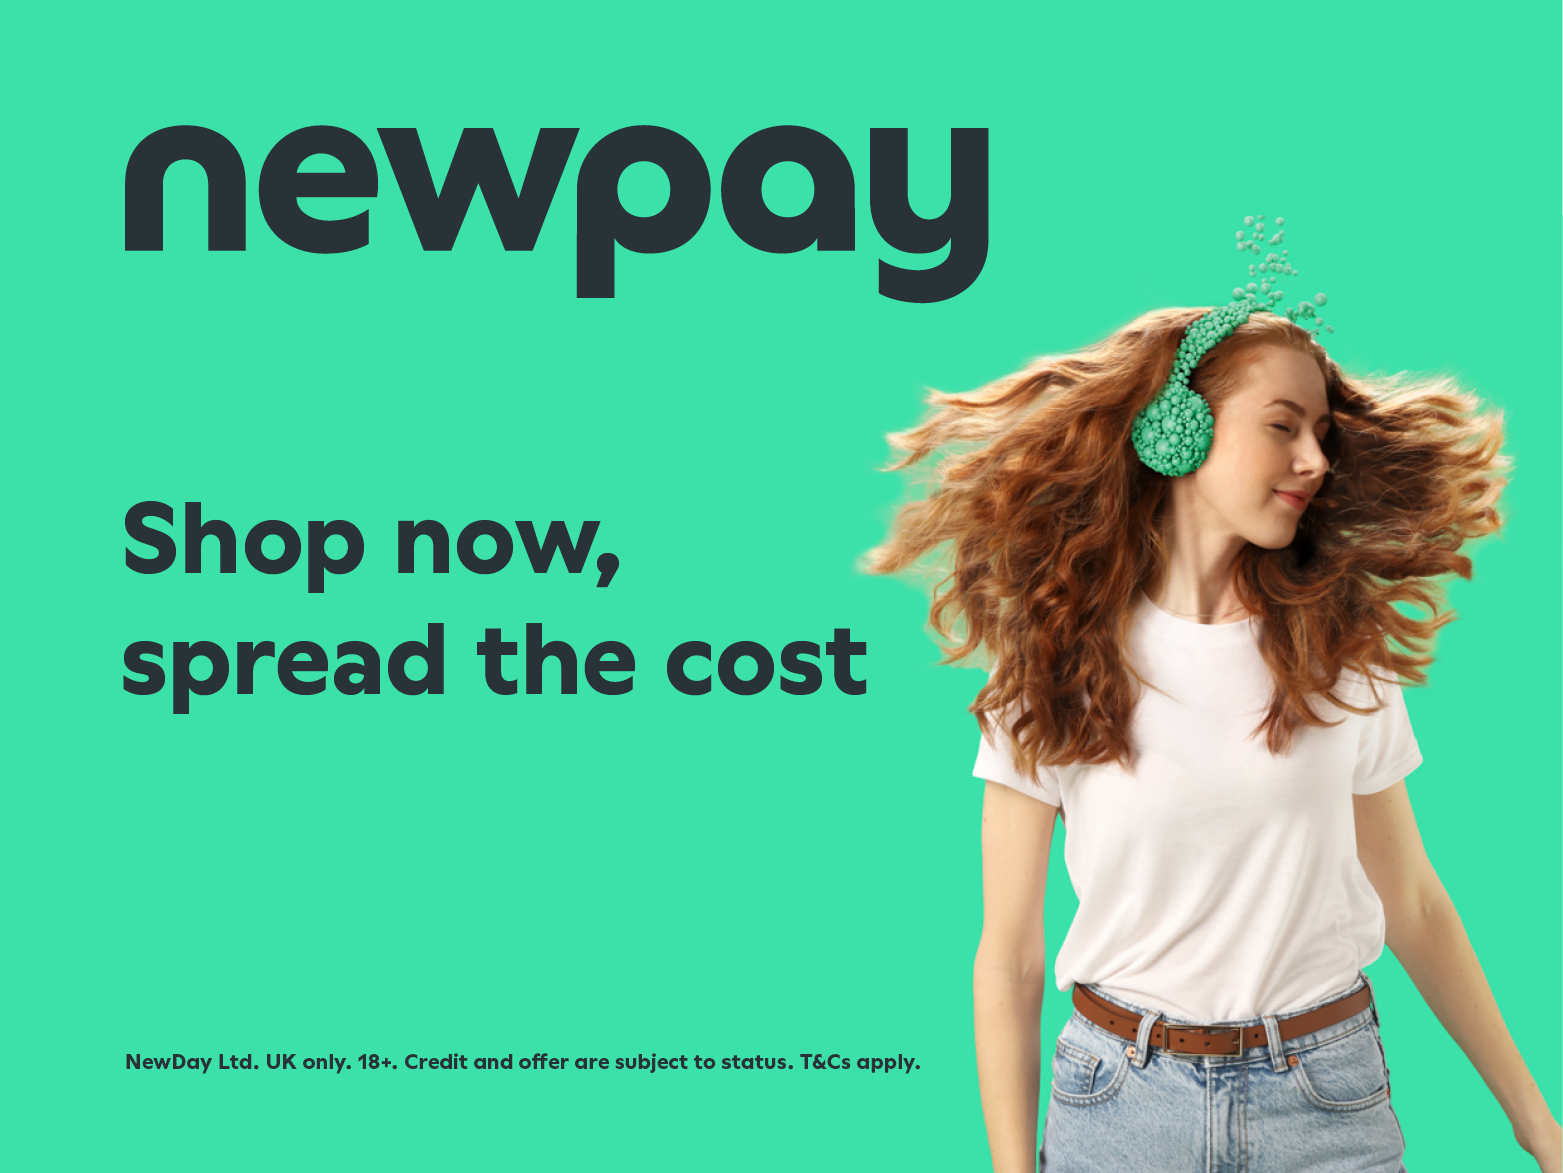 Newpay. Think Big. Pay small. Break big buys into bite-sized pieces. Newpay is a digital credit account that allows you to break down your online purchases into monthly payments.